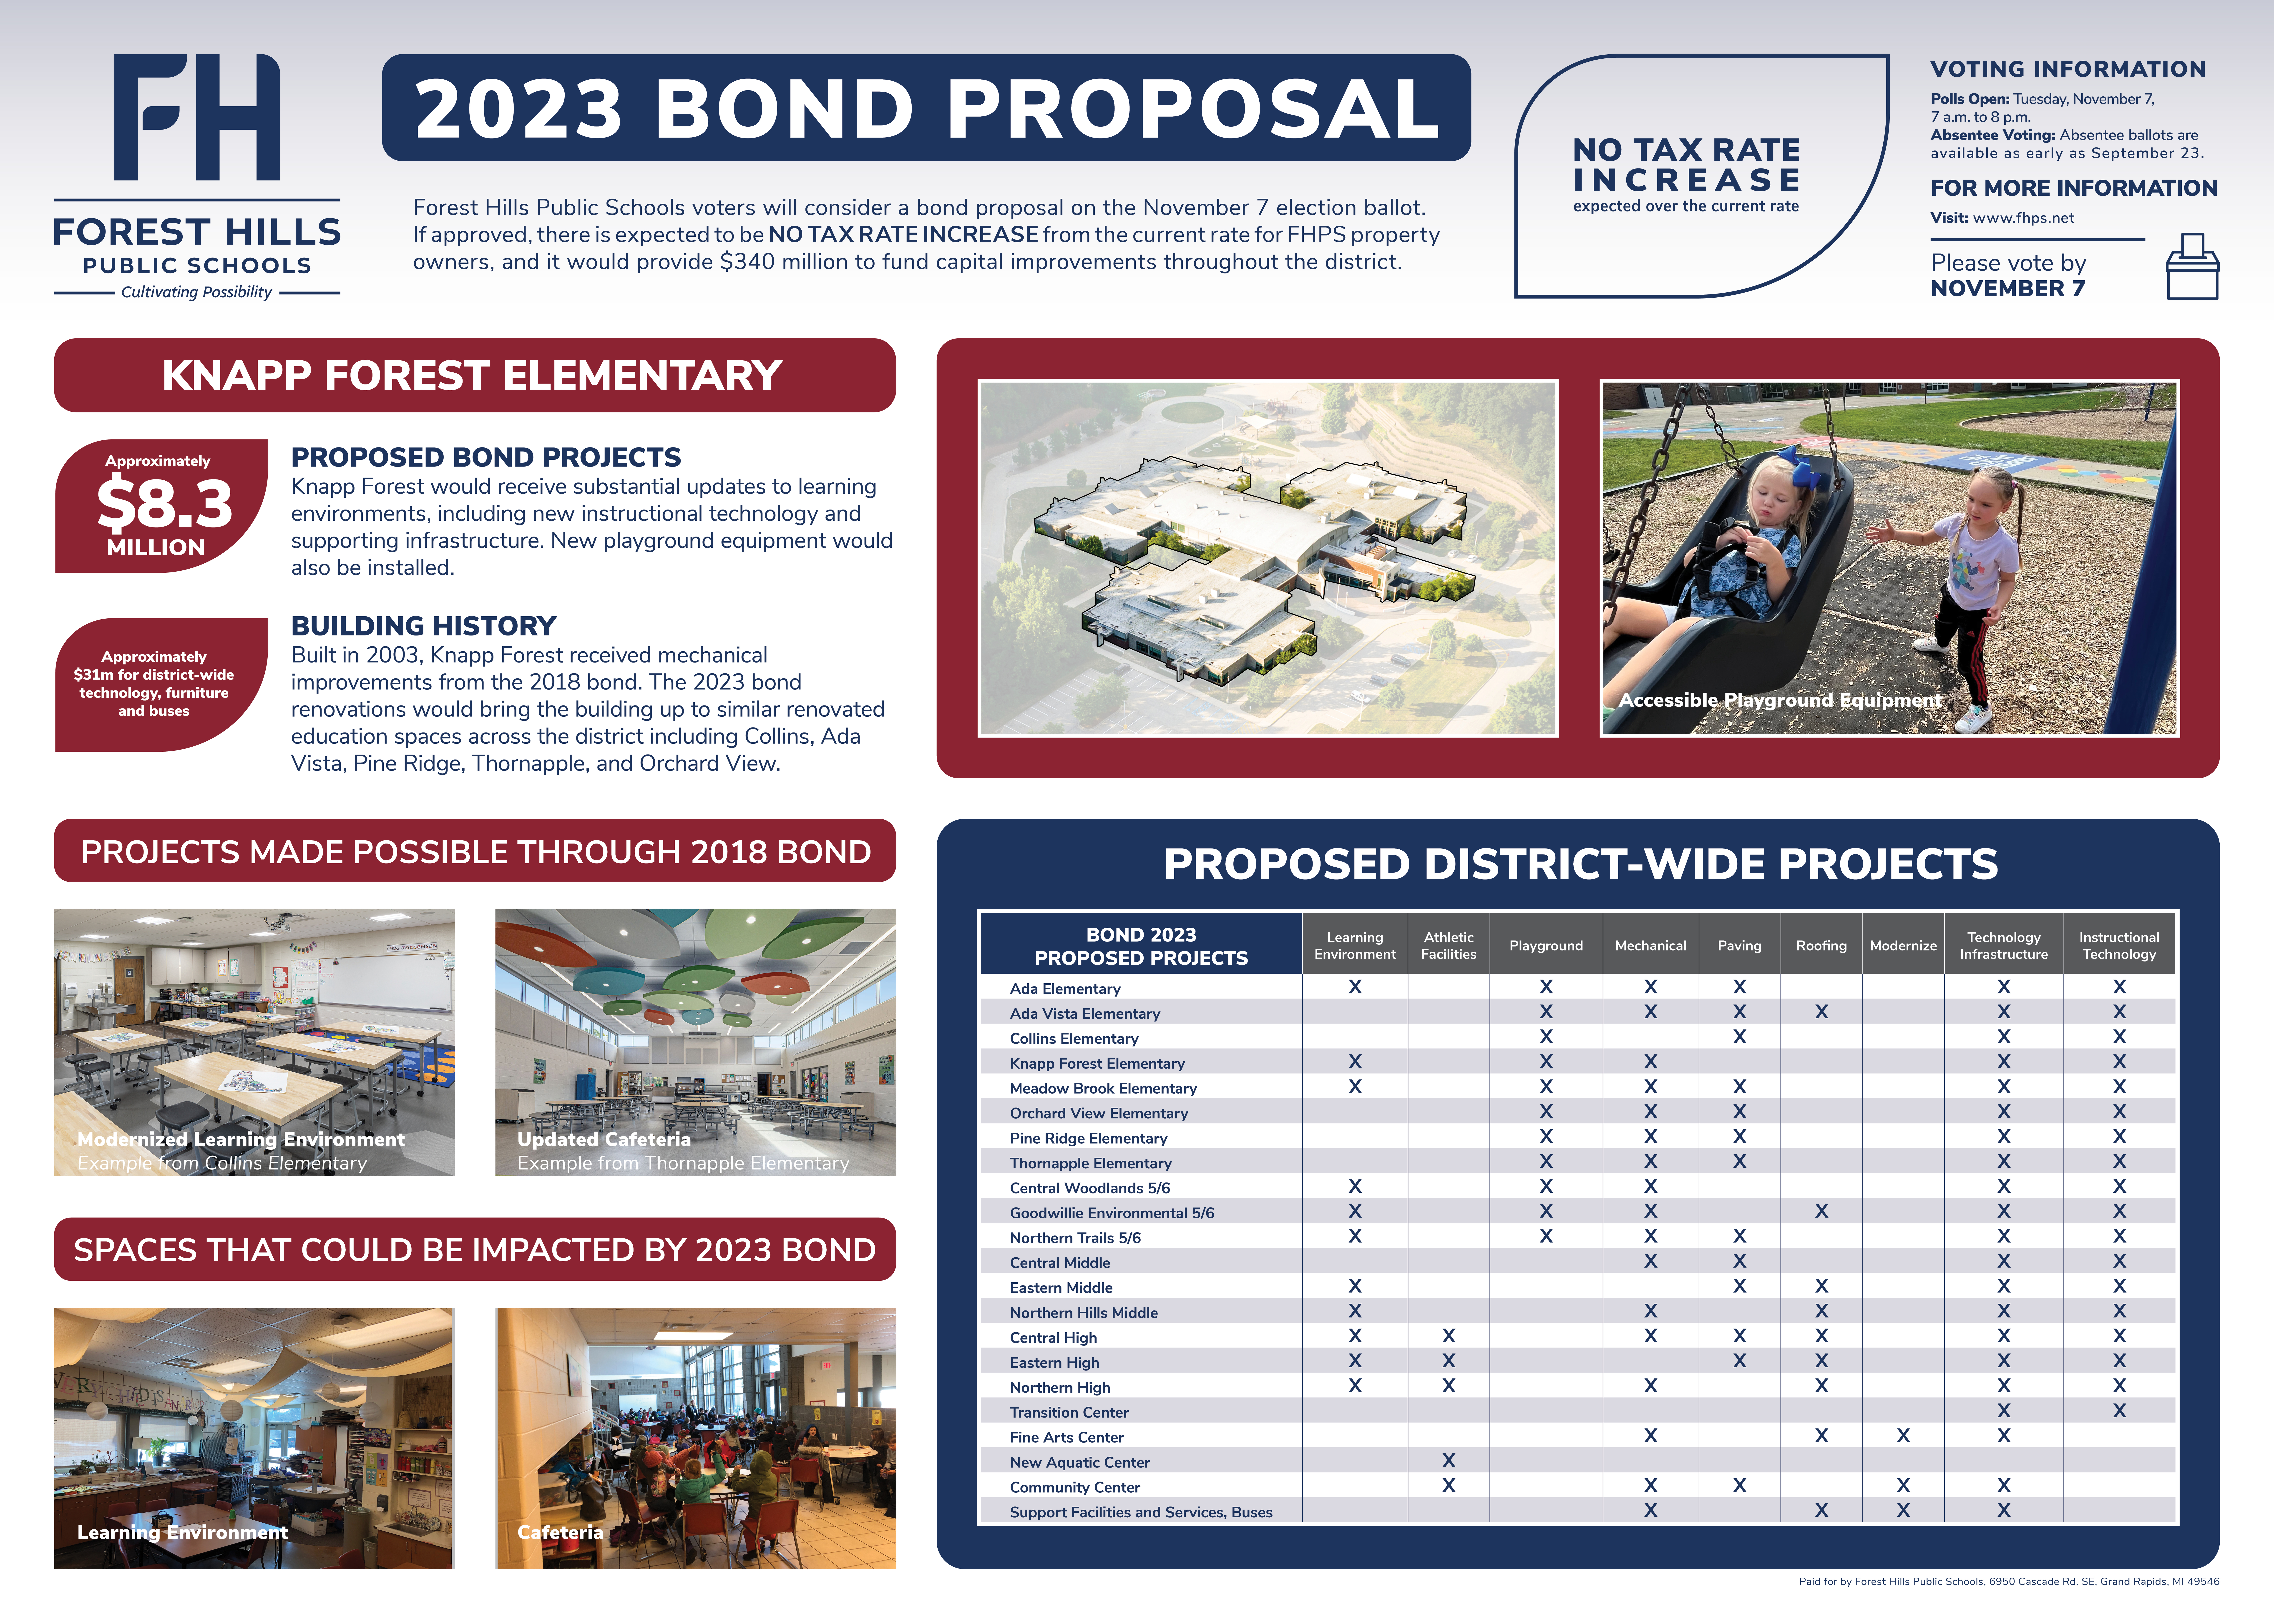 Knapp Forest and pictures of the existing building and bond project pictures from 2018 and spaces that could be impacted by the 2023 bond.